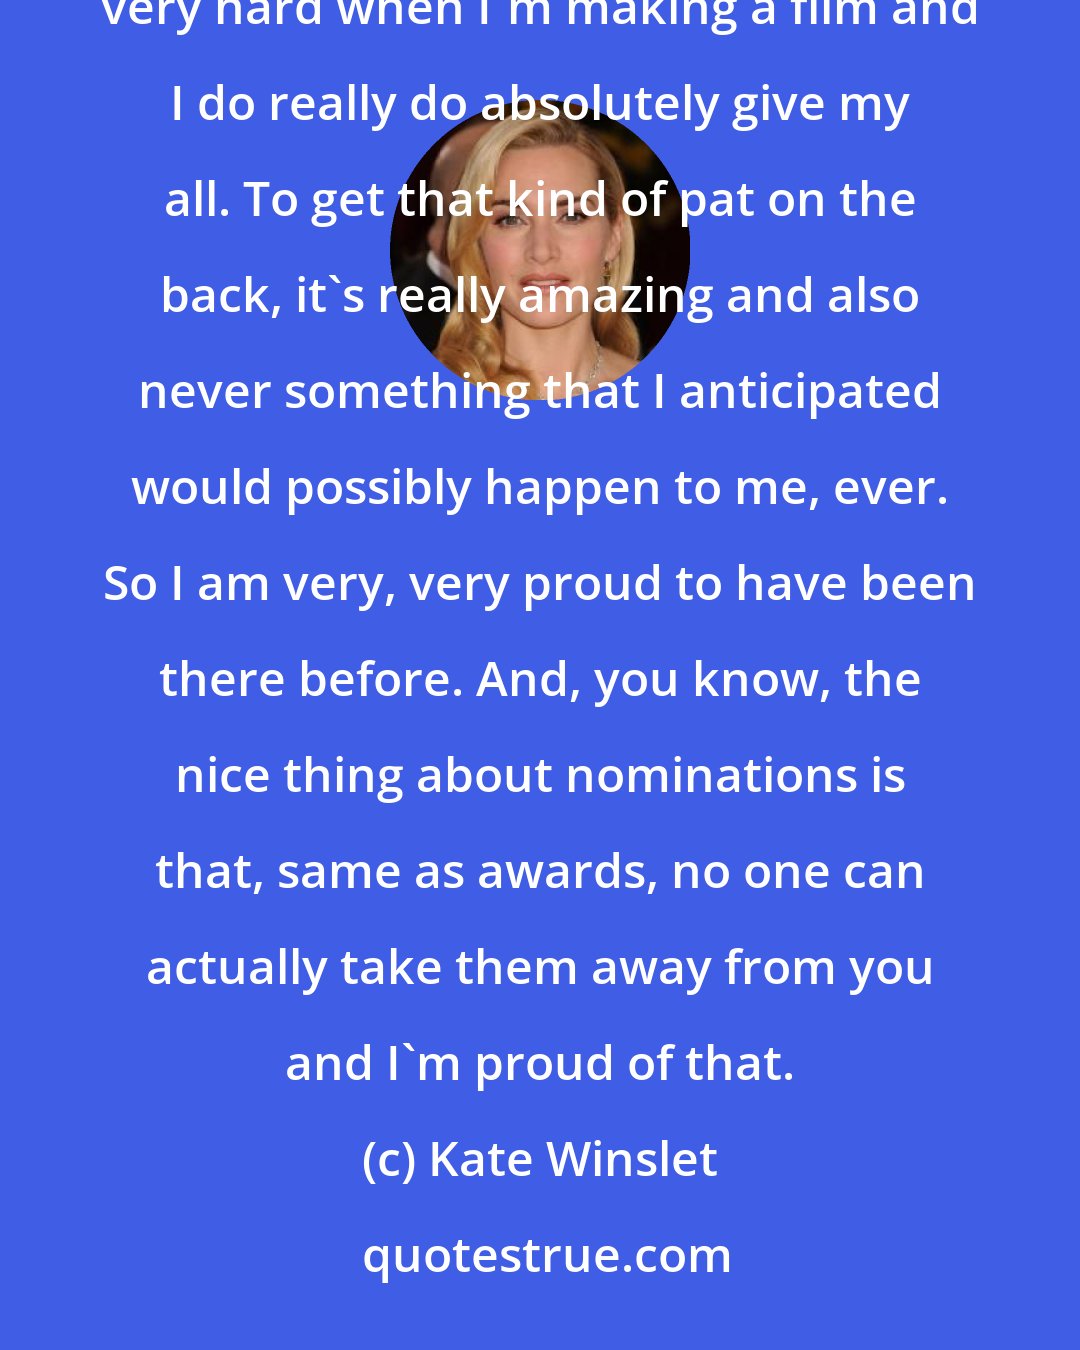 Kate Winslet: I'm incredibly proud to have been nominated in the past and it really means a lot to me because I do work very hard when I'm making a film and I do really do absolutely give my all. To get that kind of pat on the back, it's really amazing and also never something that I anticipated would possibly happen to me, ever. So I am very, very proud to have been there before. And, you know, the nice thing about nominations is that, same as awards, no one can actually take them away from you and I'm proud of that.